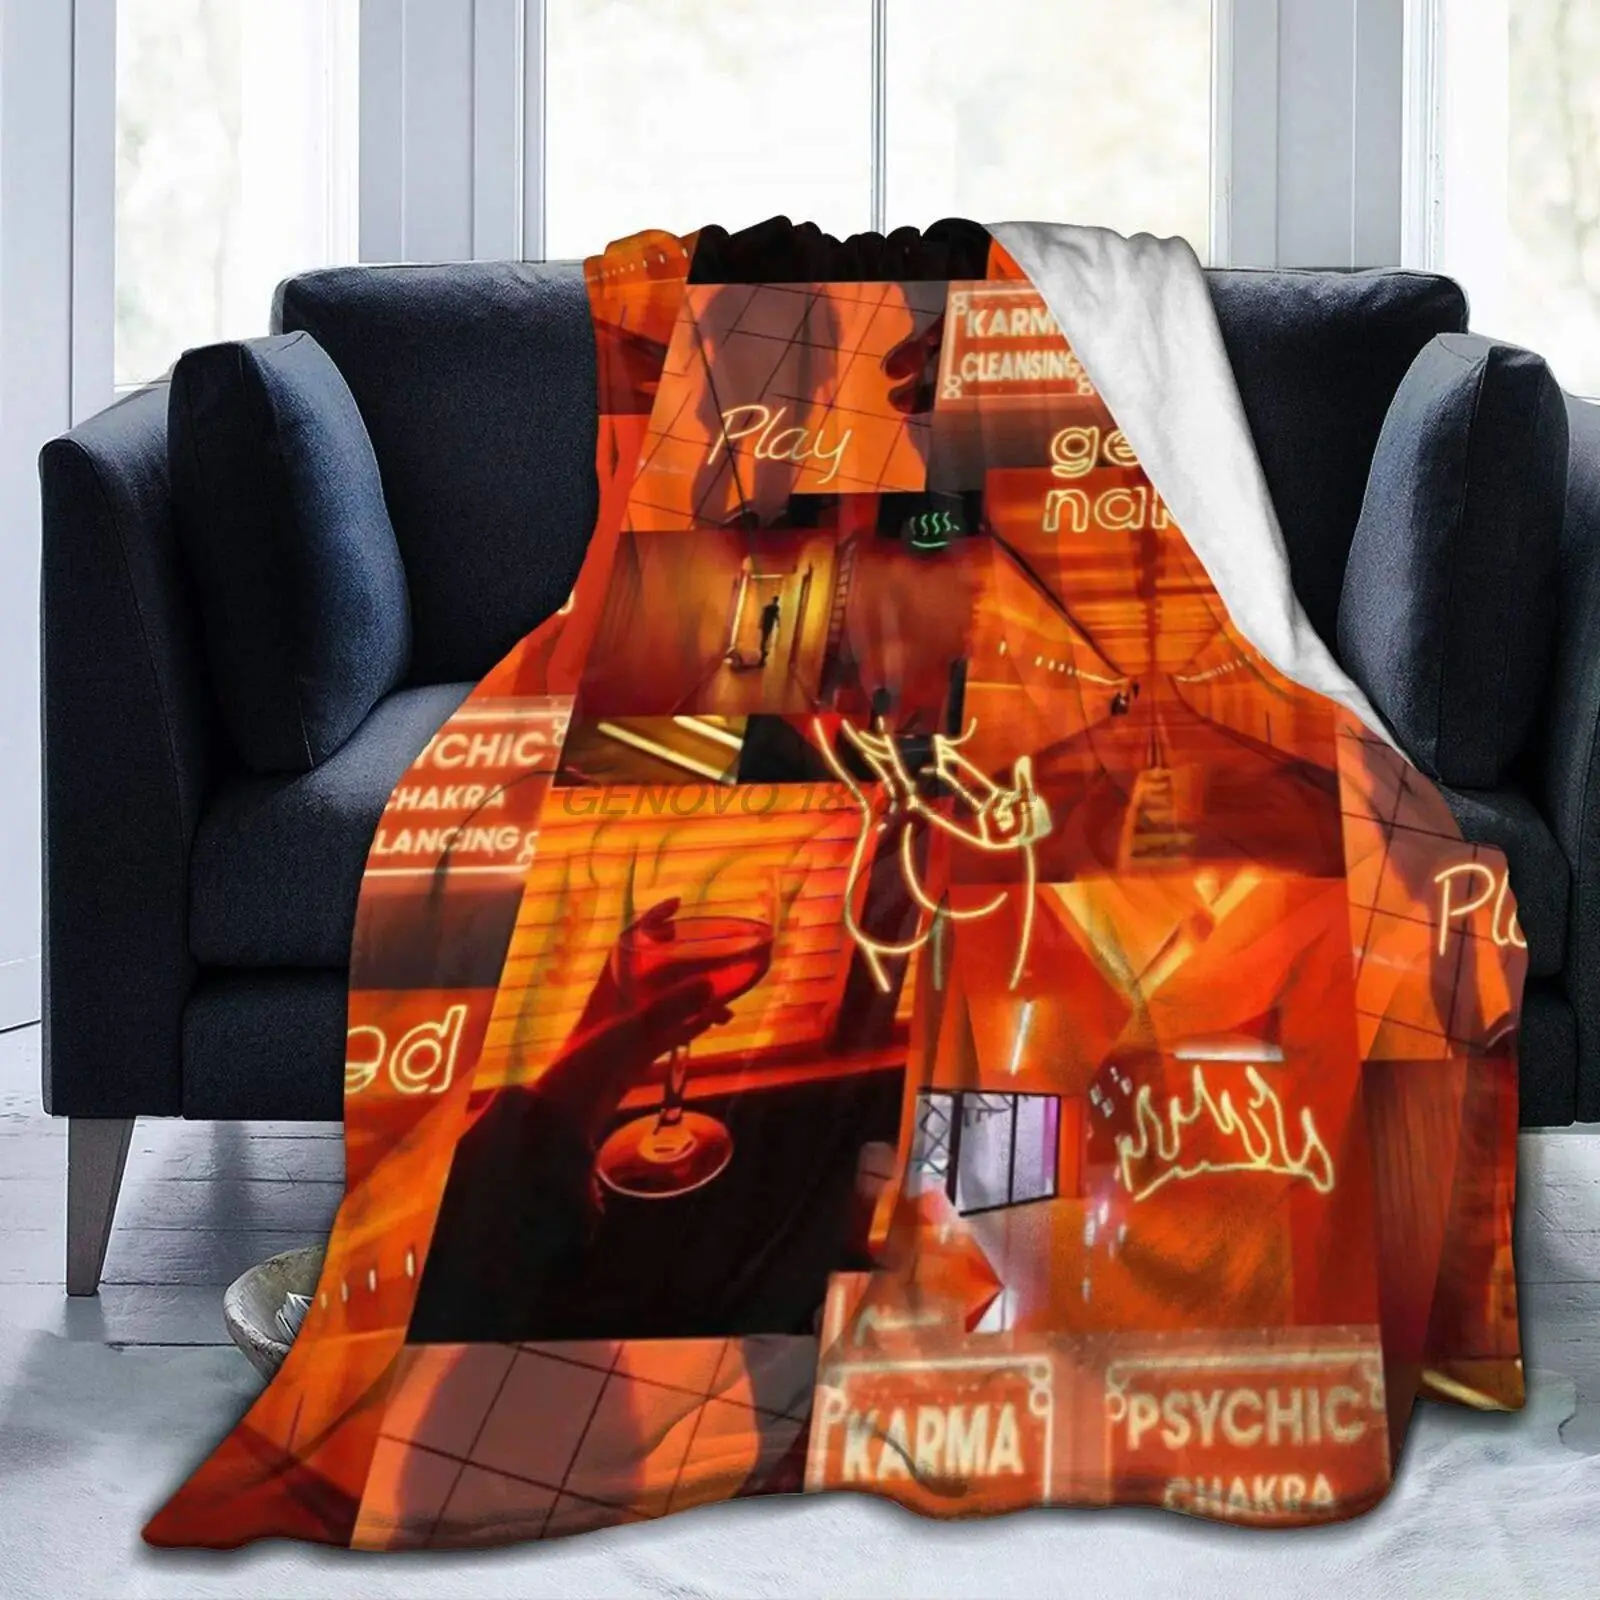 

Neon Orange Lights Collage Bed Blanket for Couch/Living Room/Warm Winter Cozy Plush Throw Blankets for Adults Or Kids 80 X